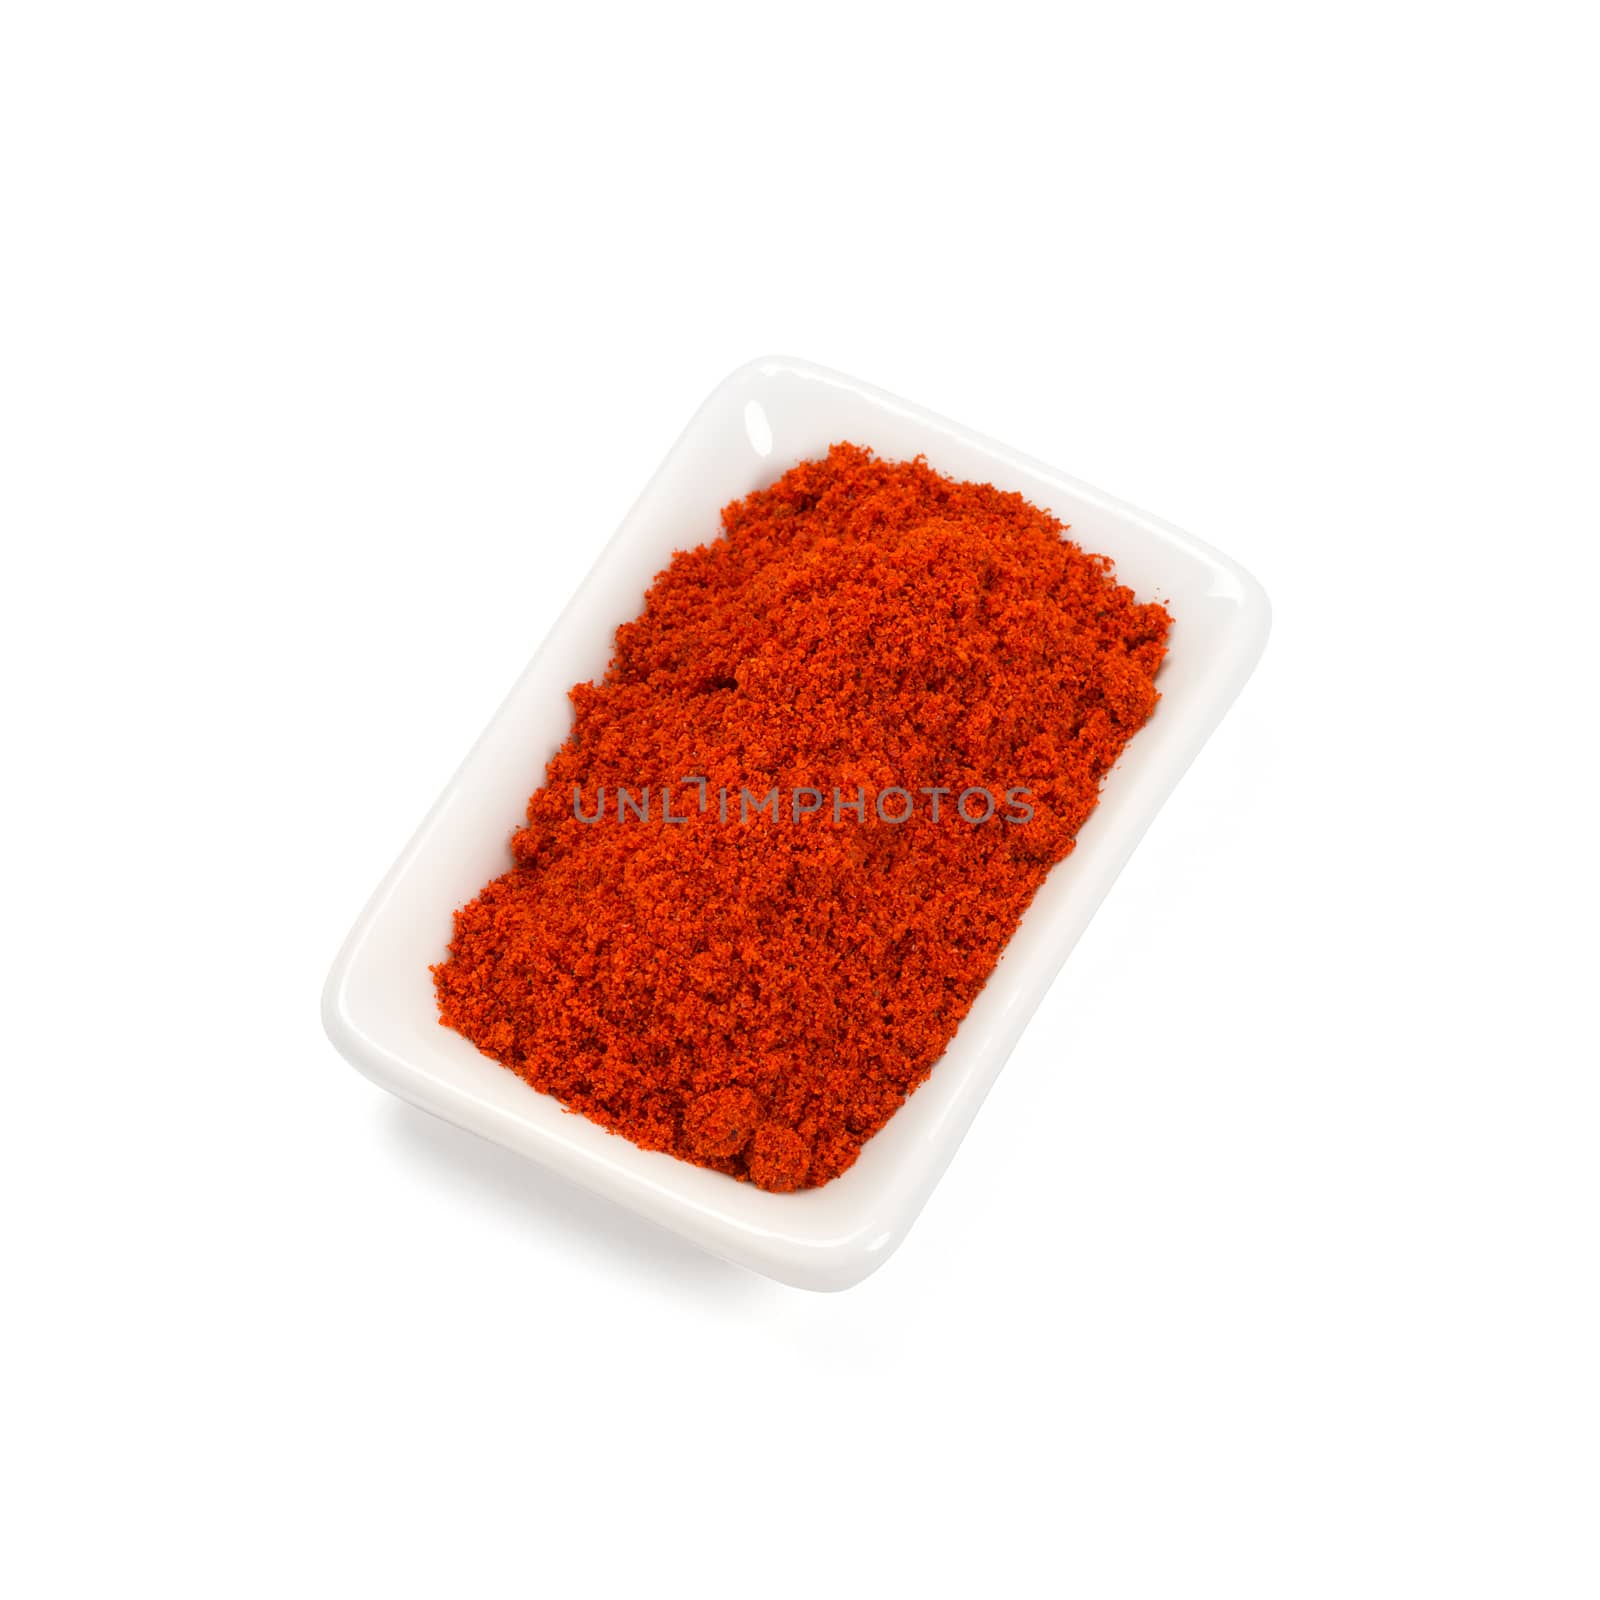 Red pepper pod on pile of chili powder isolated on white by ivo_13